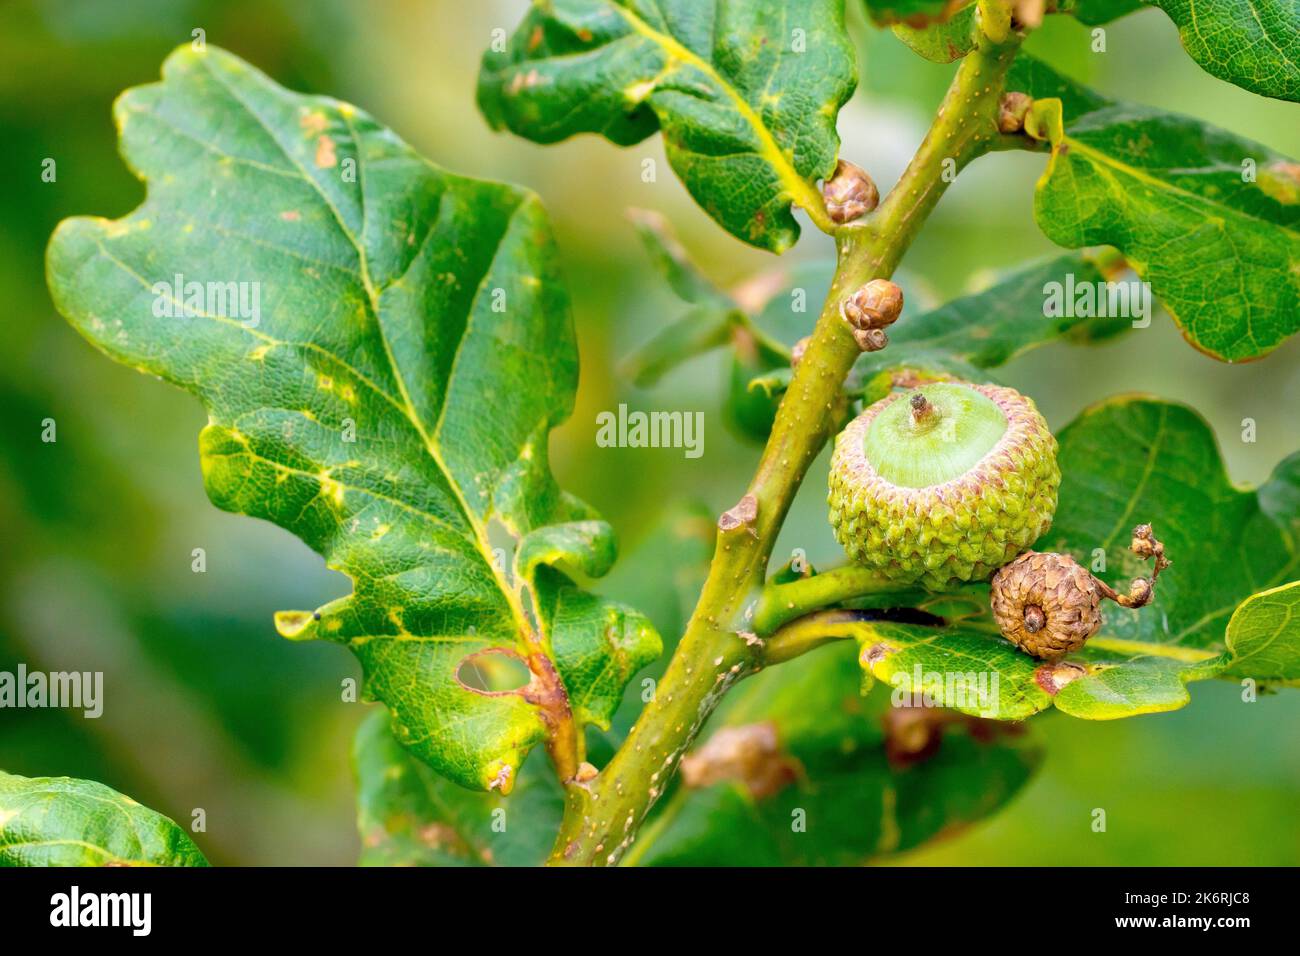 English or Pedunculate Oak (quercus robur), close up showing a developing acorn hidden amongst the leaves of the tree. Stock Photo